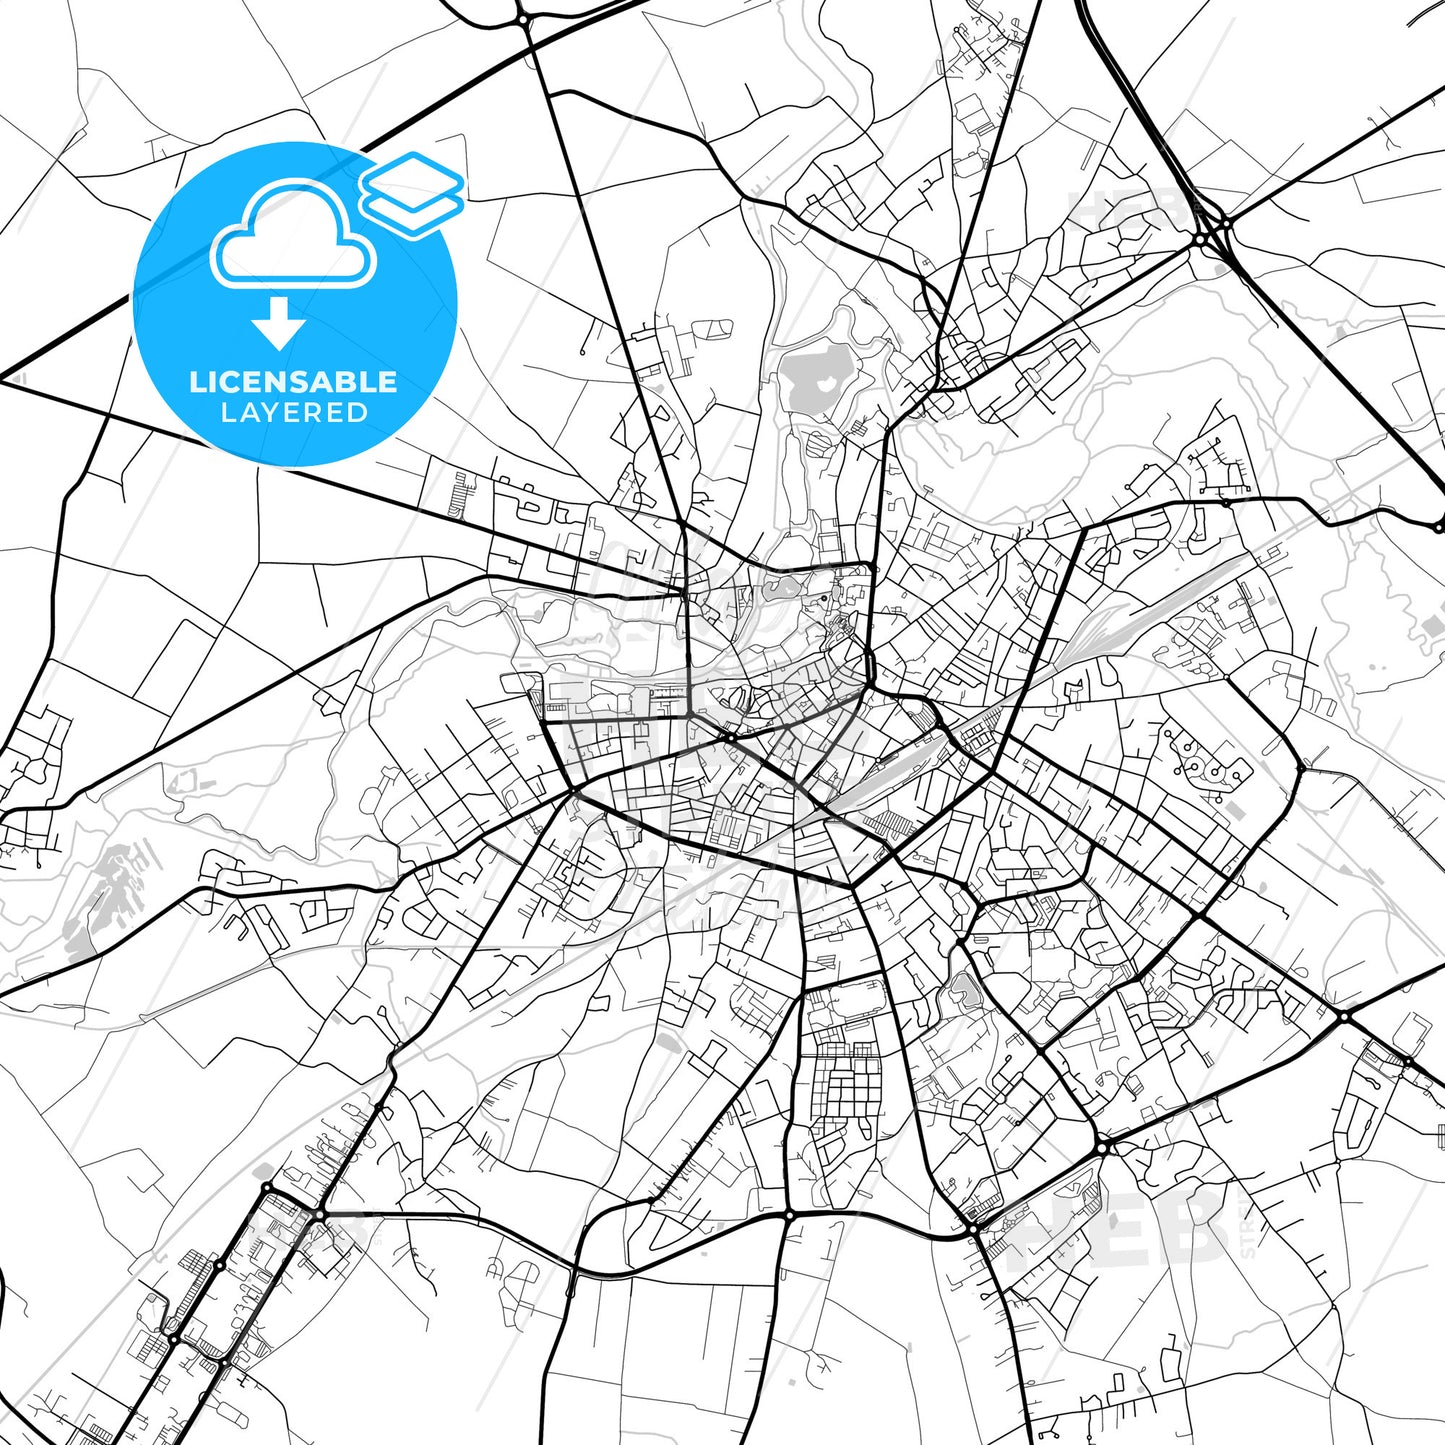 Layered PDF map of Châteauroux, Indre, France